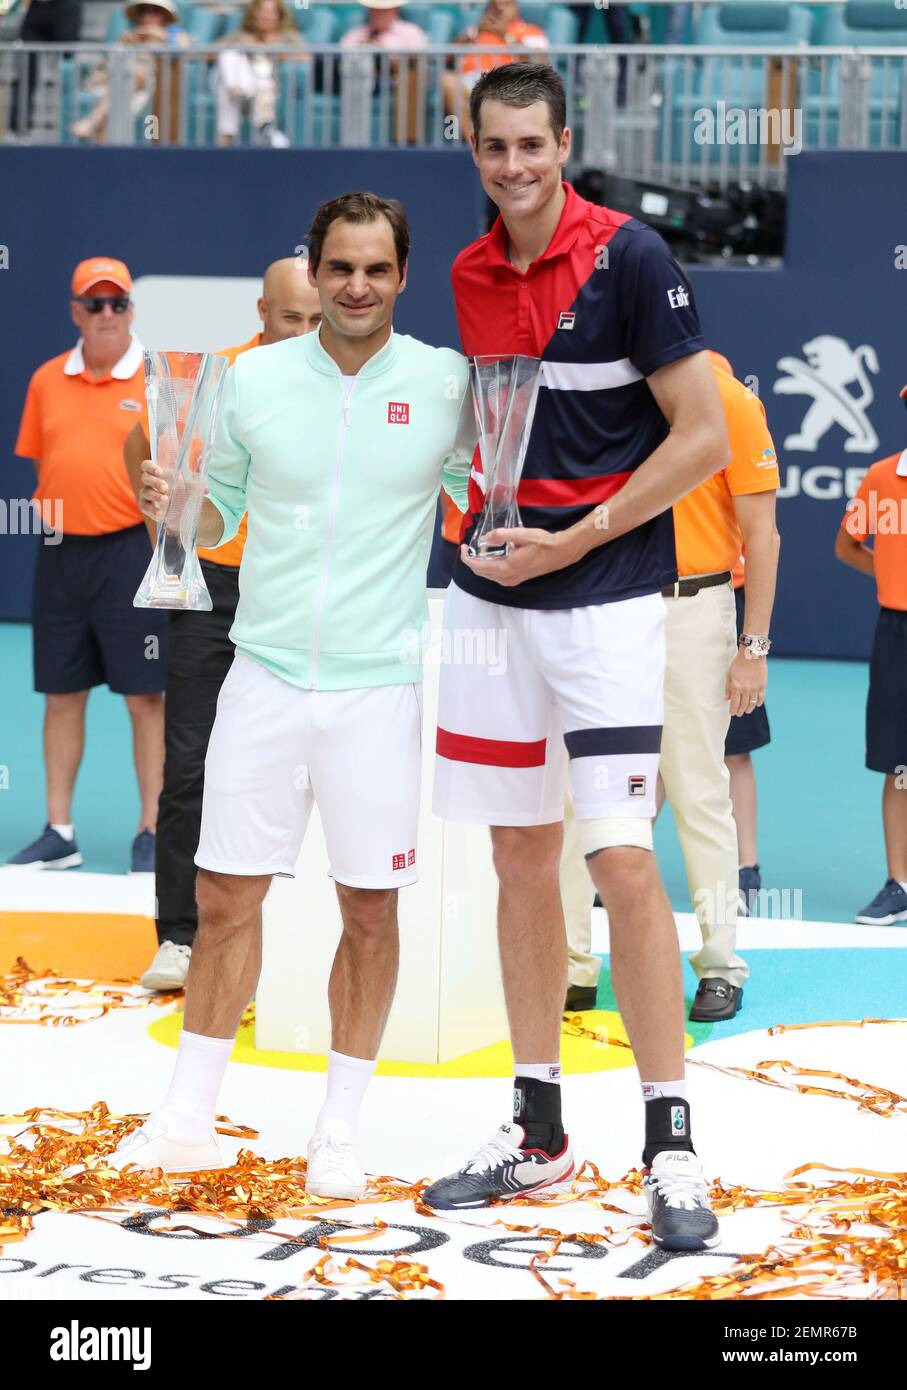 MIAMI GARDENS, FLORIDA - MARCH 31: Roger Federer of Switzerland and John  Isner pose for photographers at the trophy ceremony during the men's final  of the Miami Open Presented by Itau at